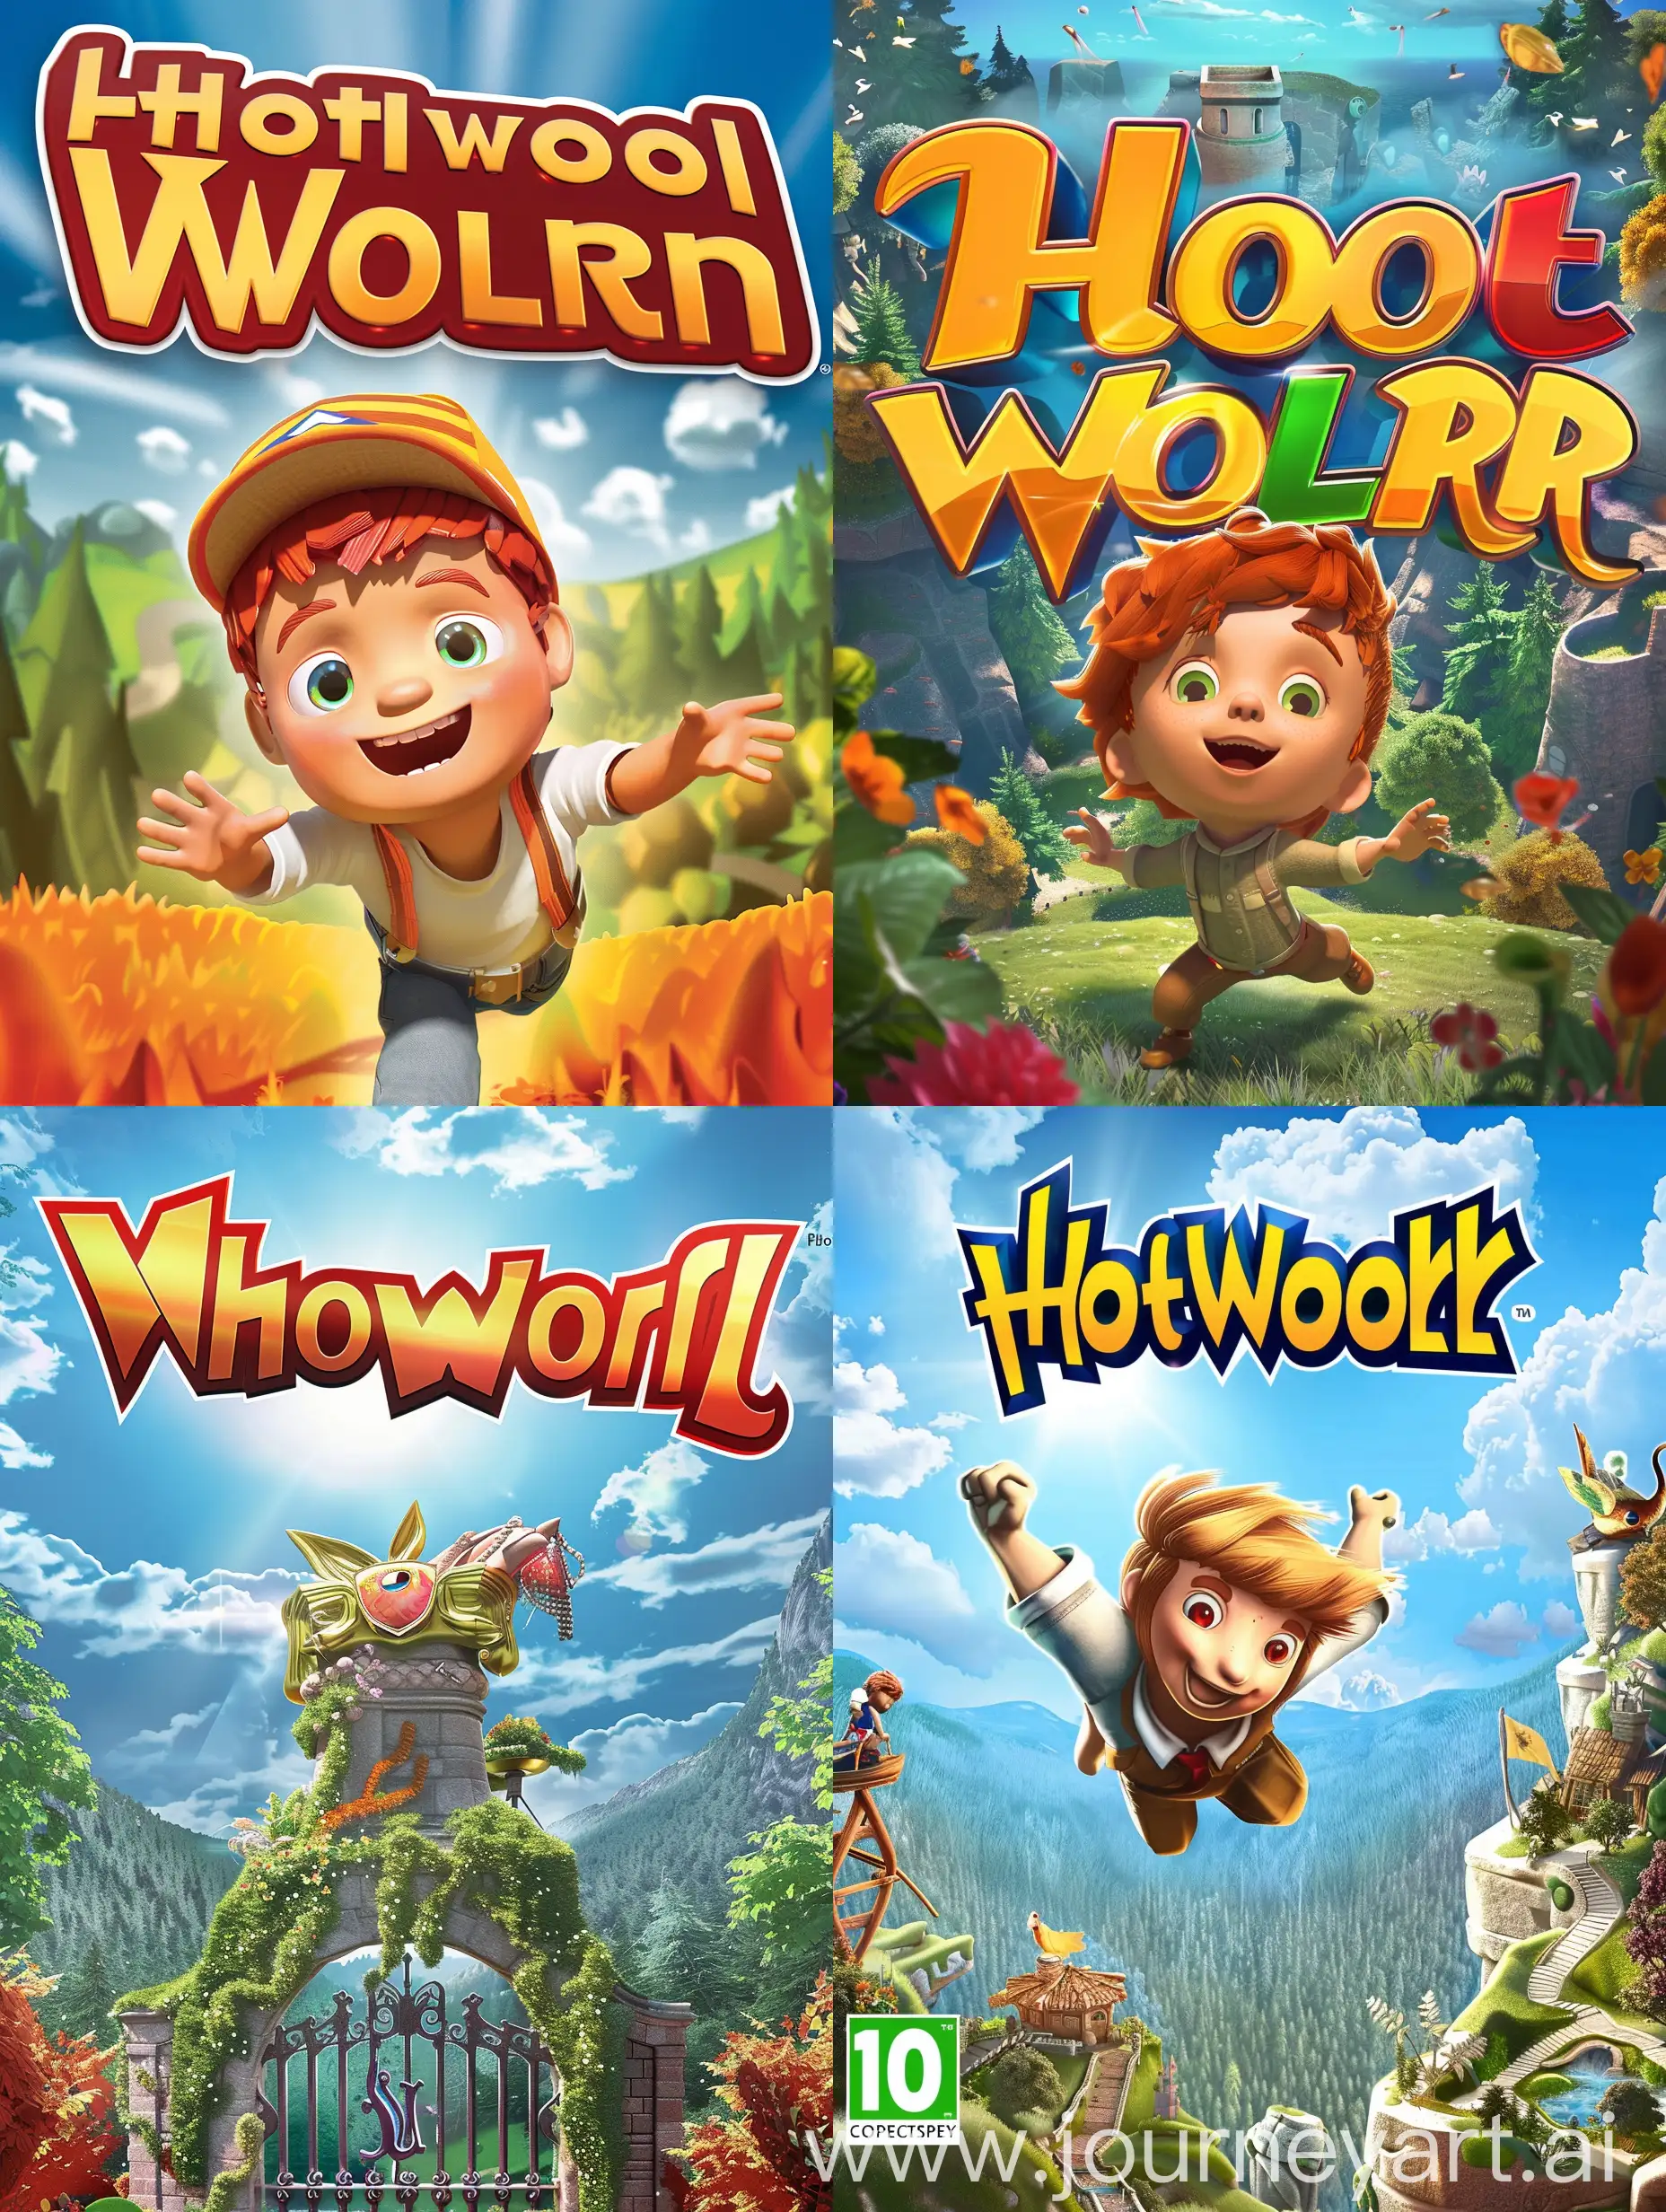 Cover of the game "PhotoWorld"